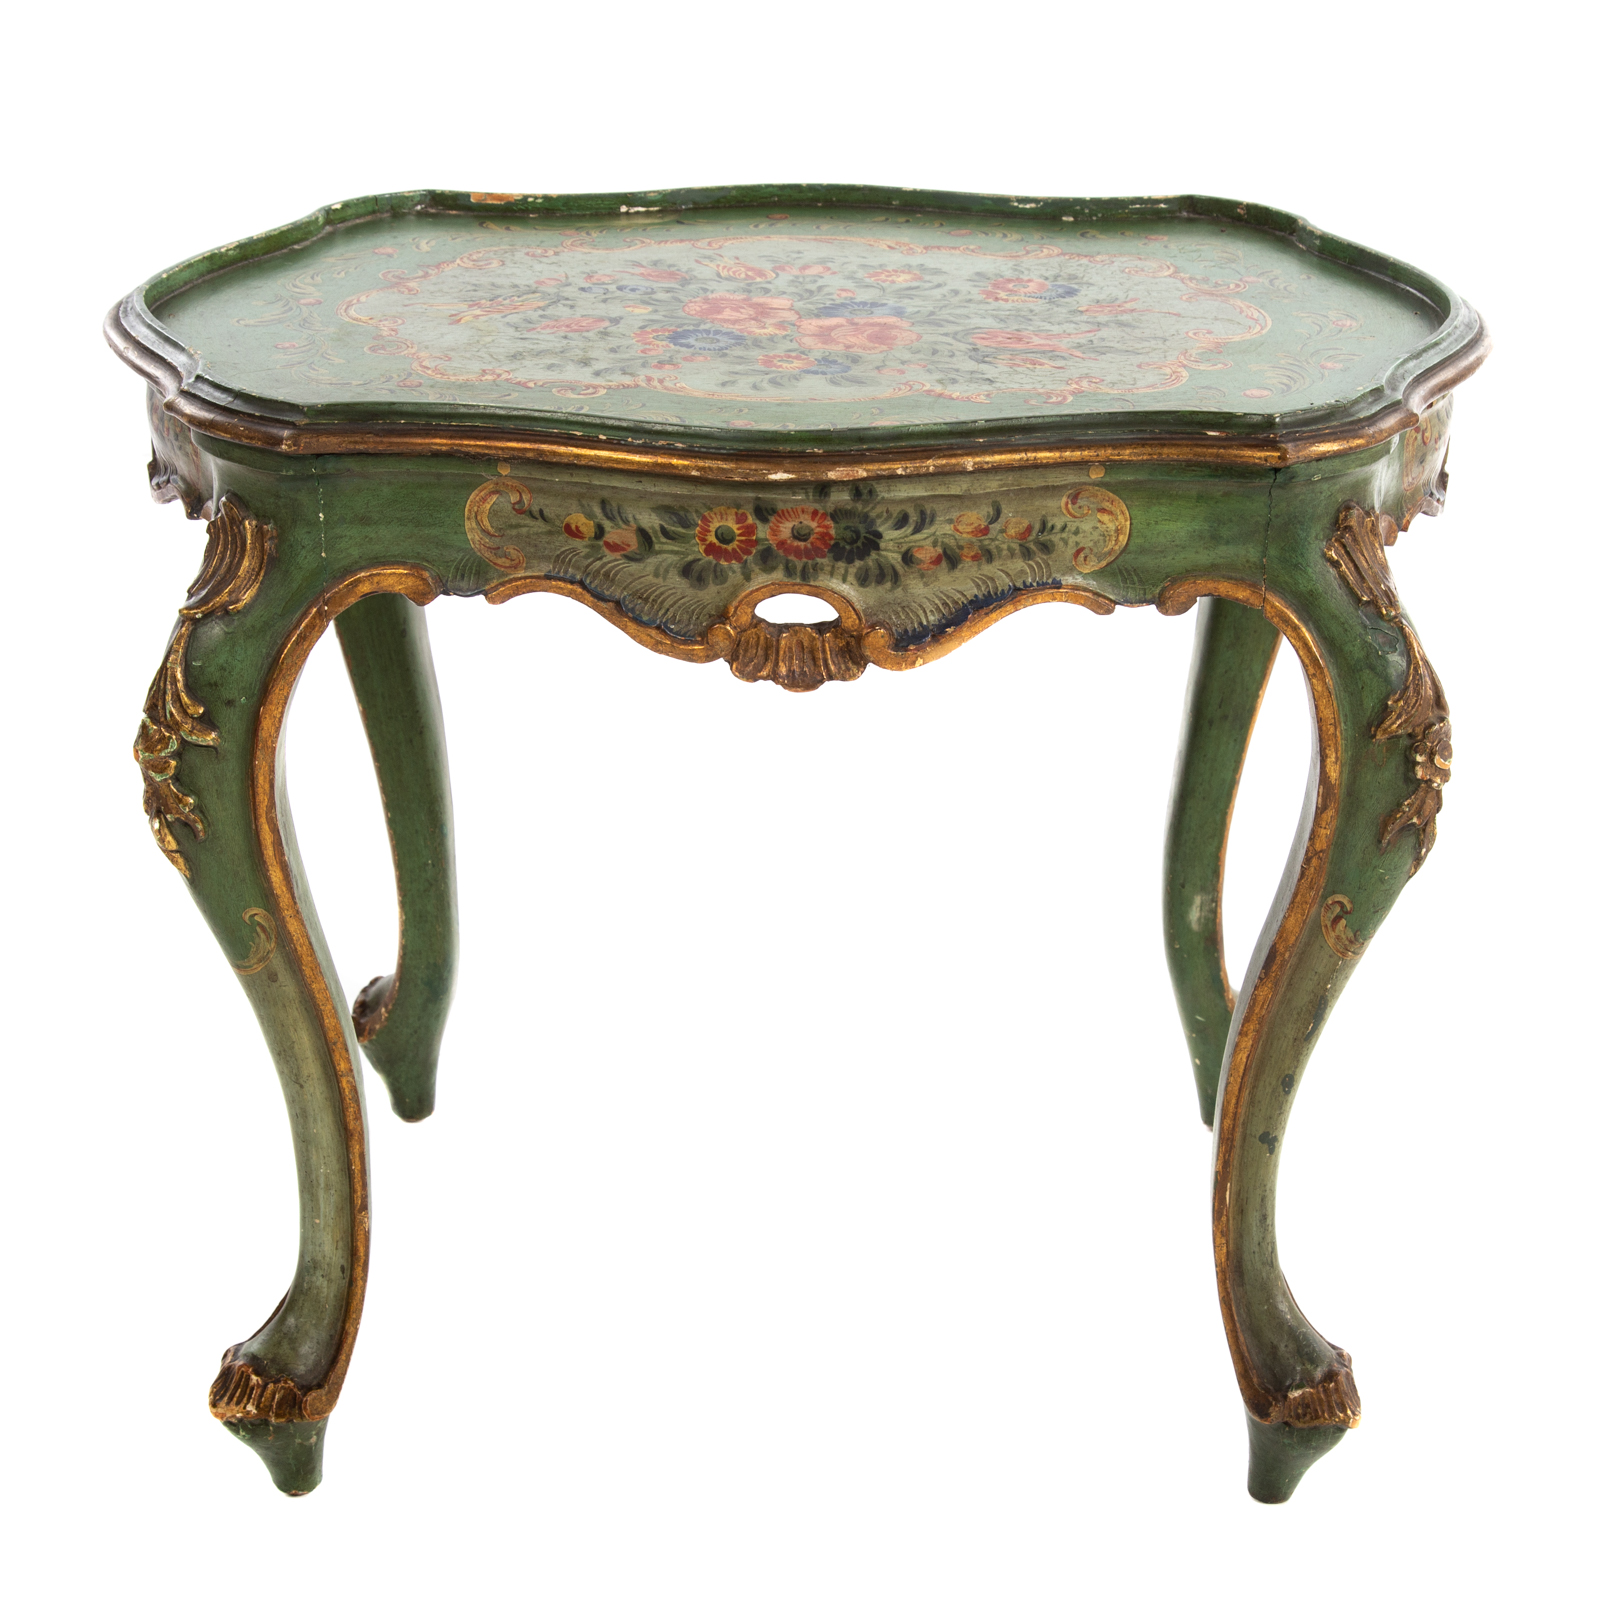 LOUIS XV STYLE PAINTED WOOD SIDE